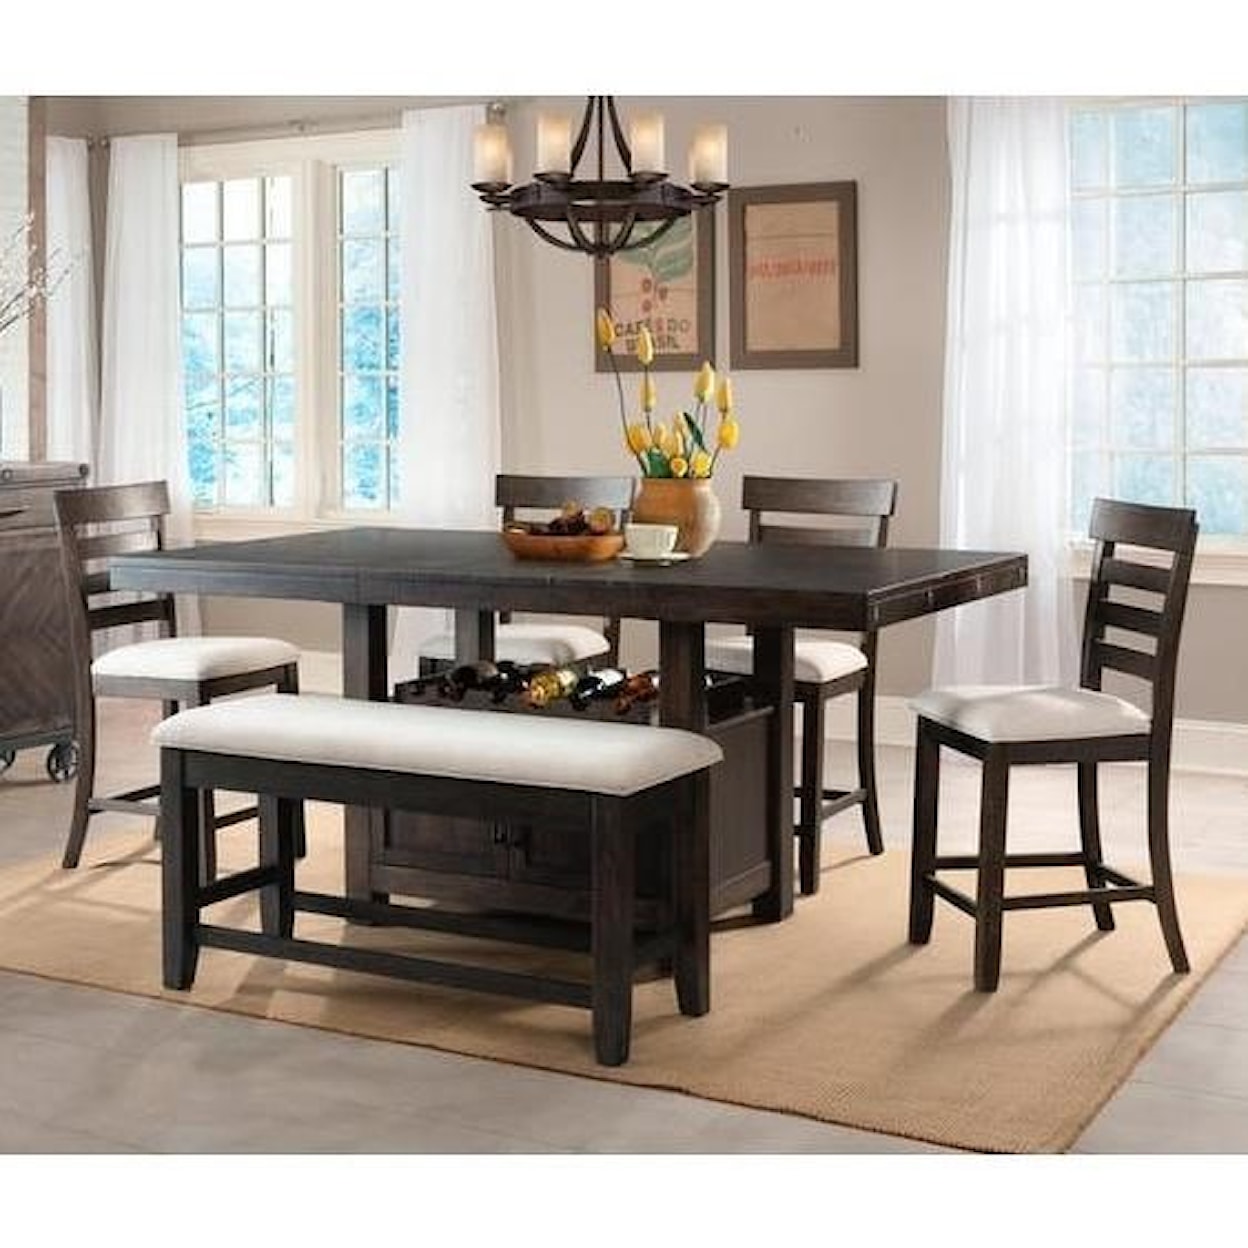 Elements Colorado Counter Height Dining Set with Bench